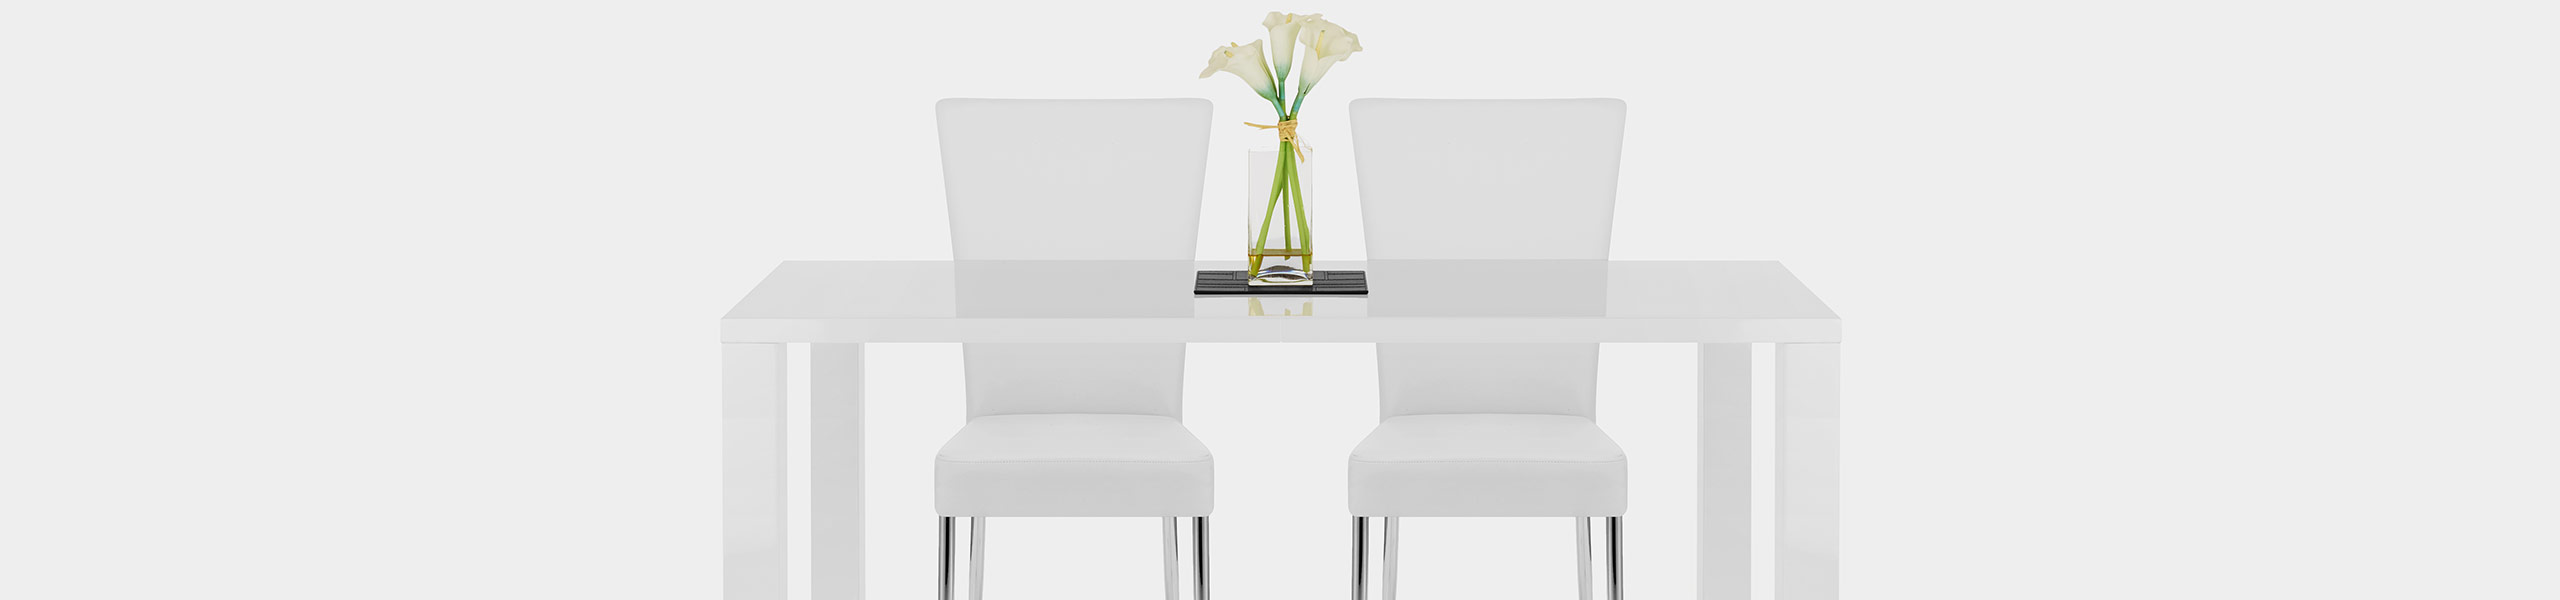 Picasso Dining Chair White Video Banner